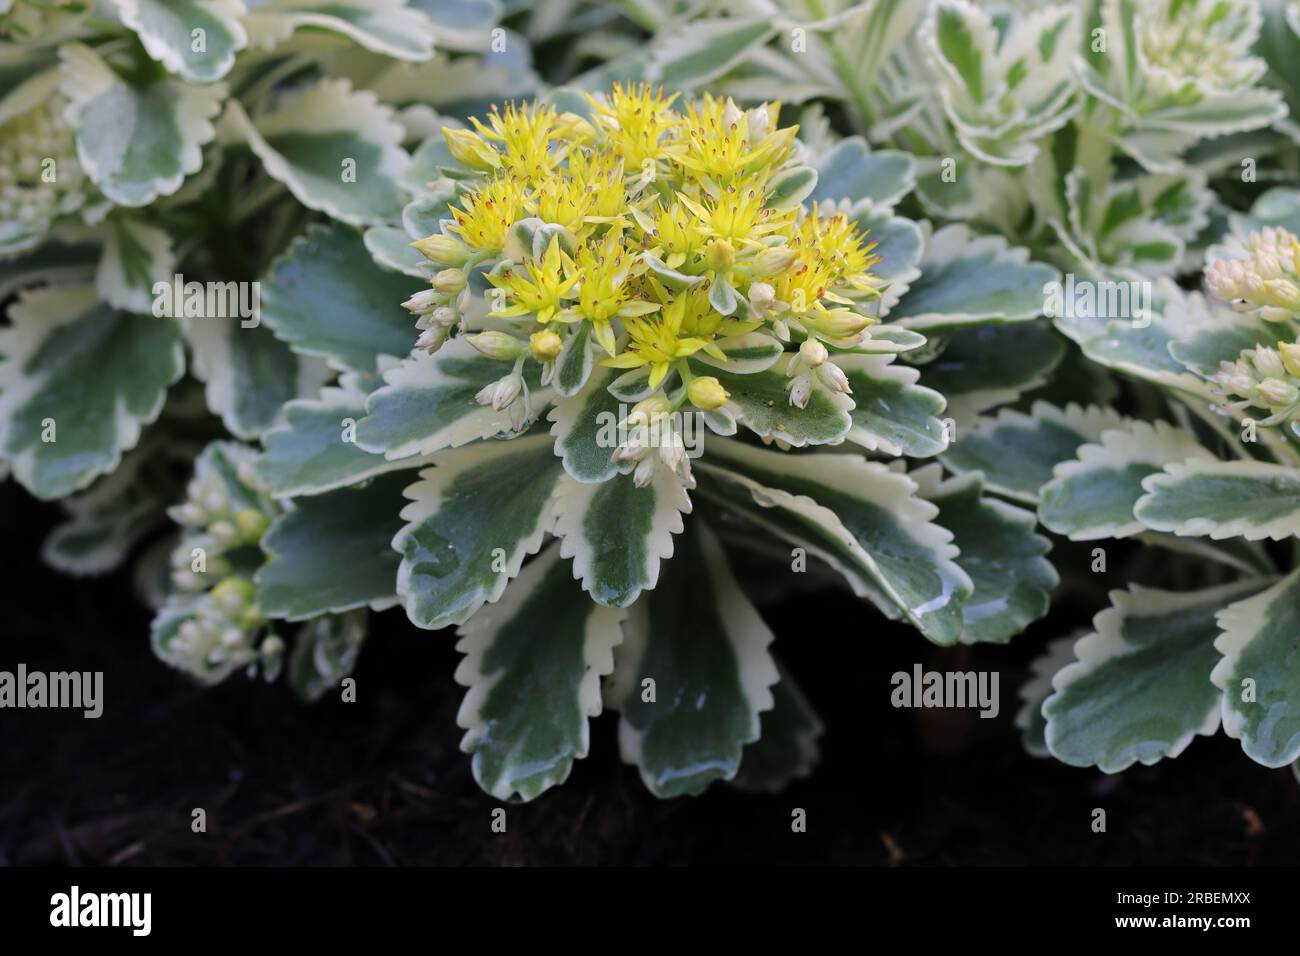 Close-up of a beautiful Phedimus aizoon plant with a dense yellow inflorescence, side view Stock Photo